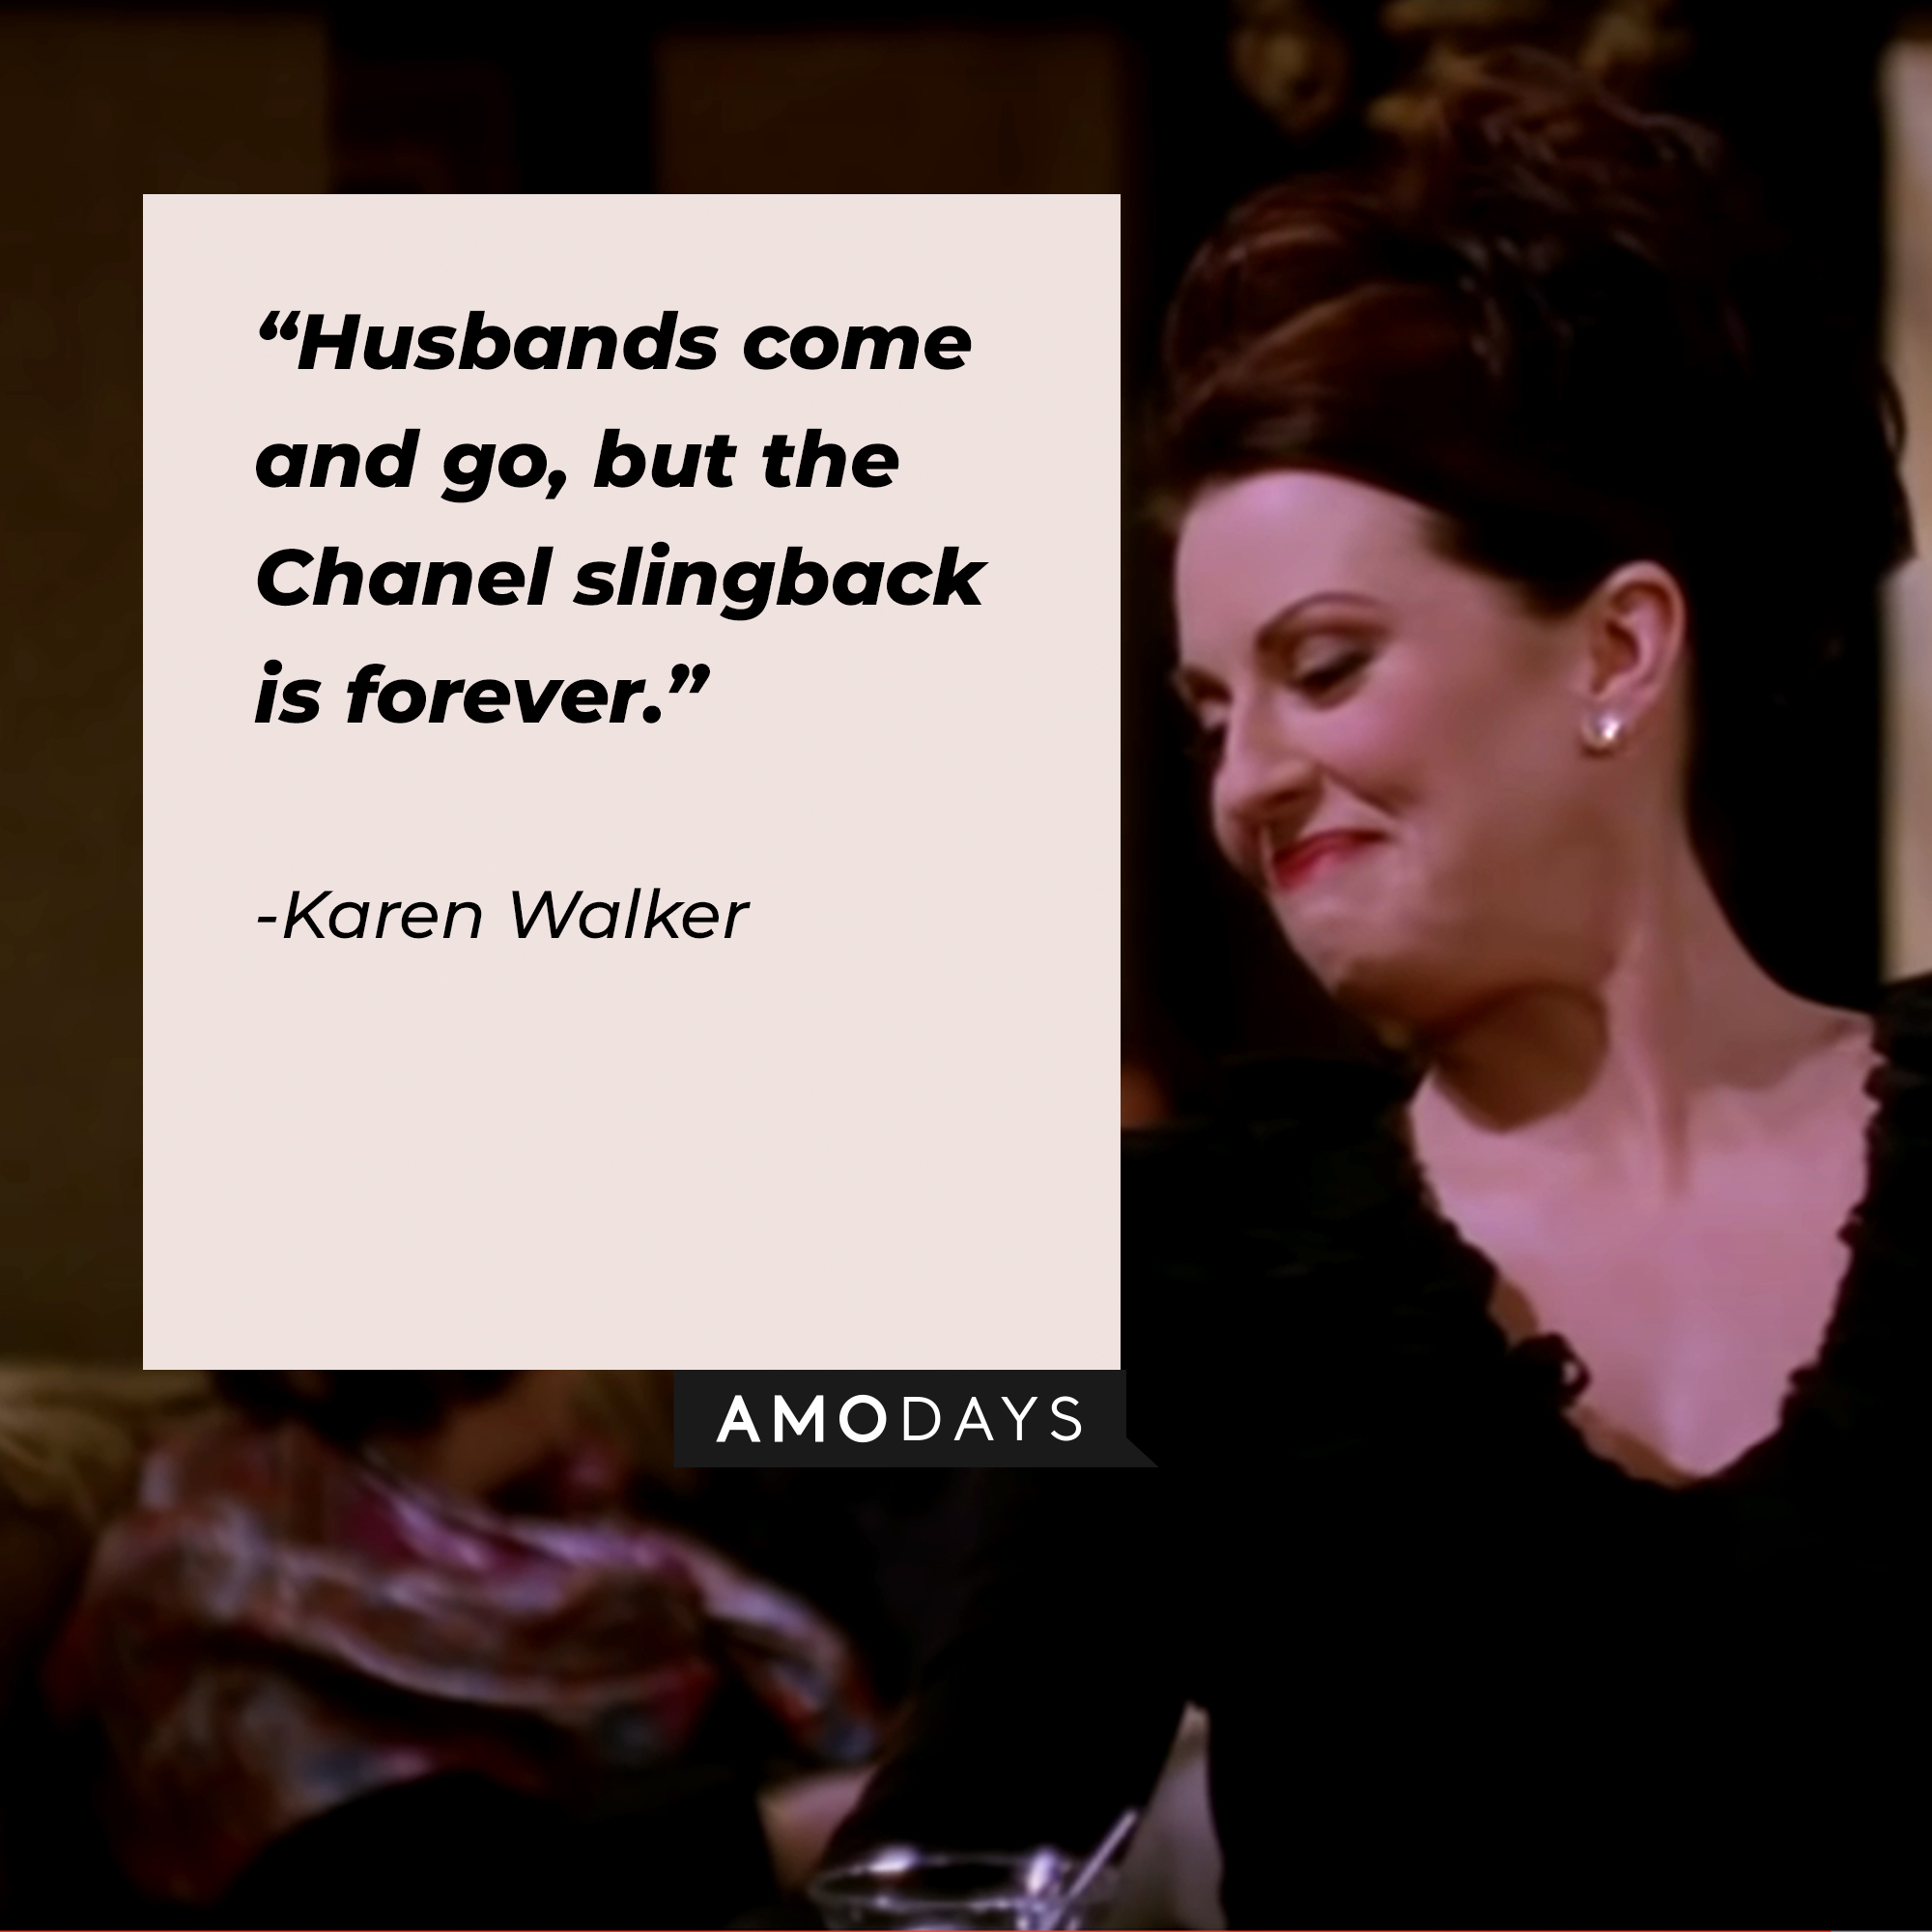 A photo of Karen Walker with the quote, "Husbands come and go, but the Chanel slingback is forever." | Source: YouTube/ComedyBites